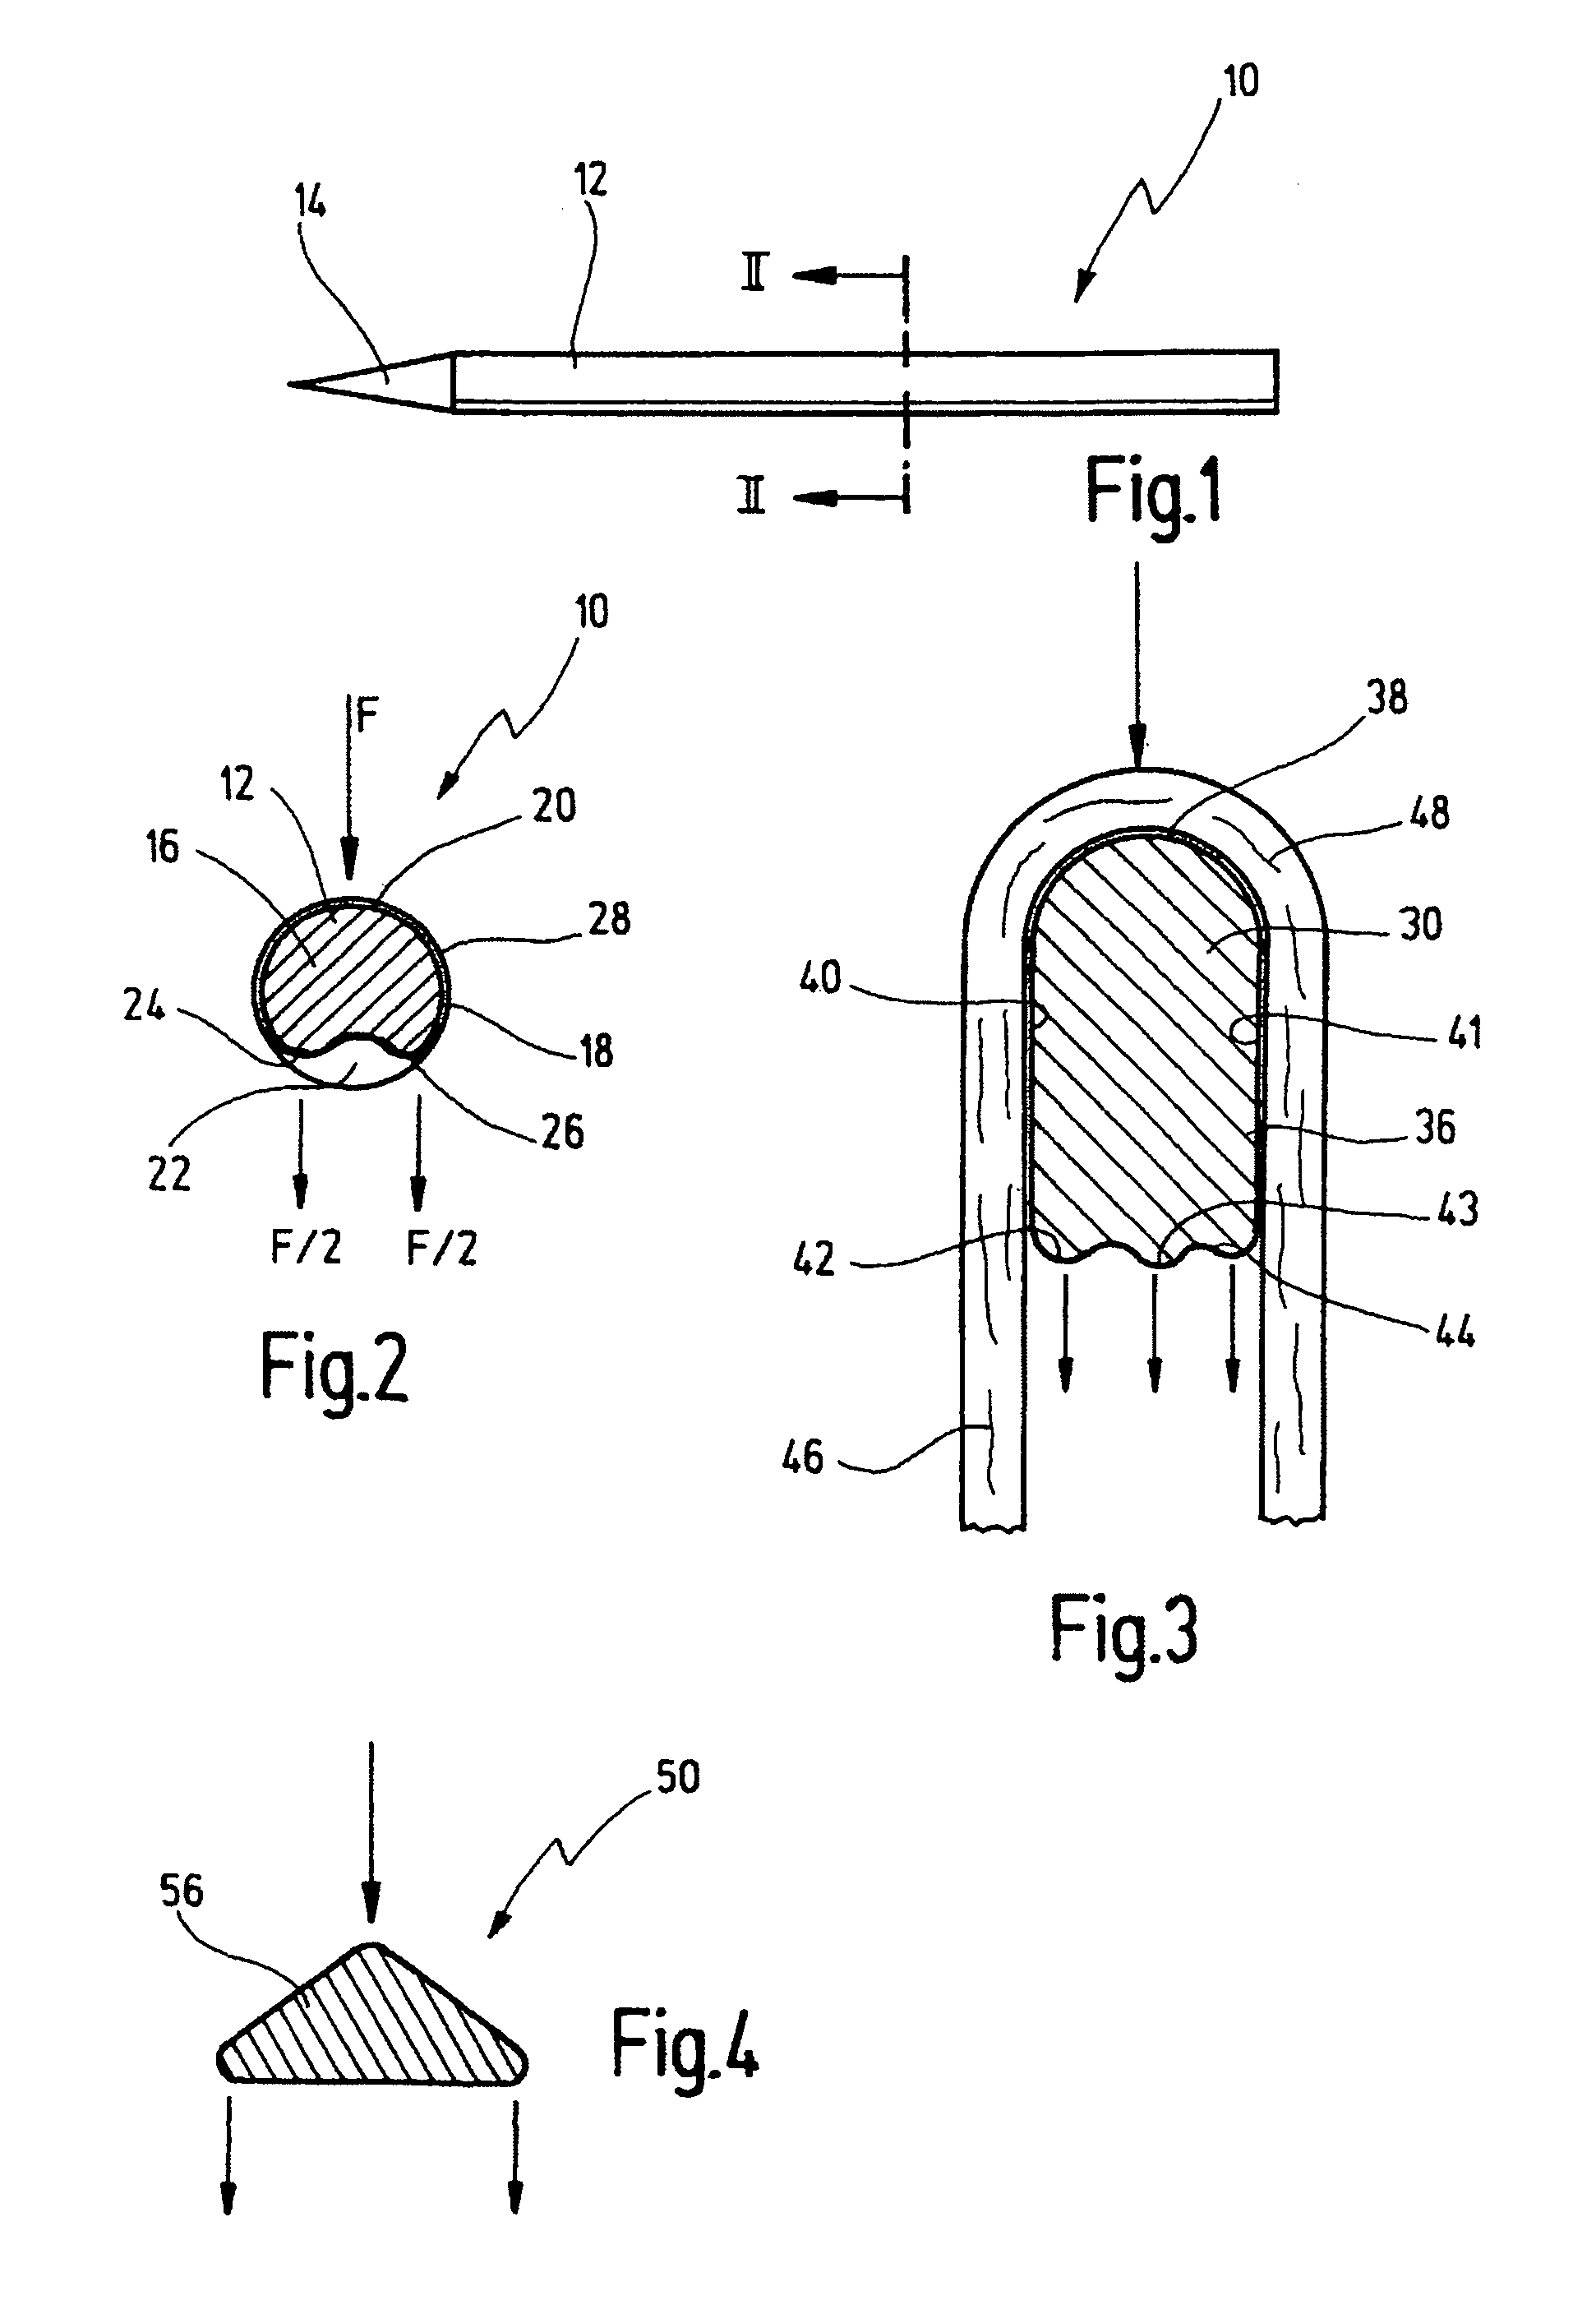 Pin for fixing an implant subjected to tensile load